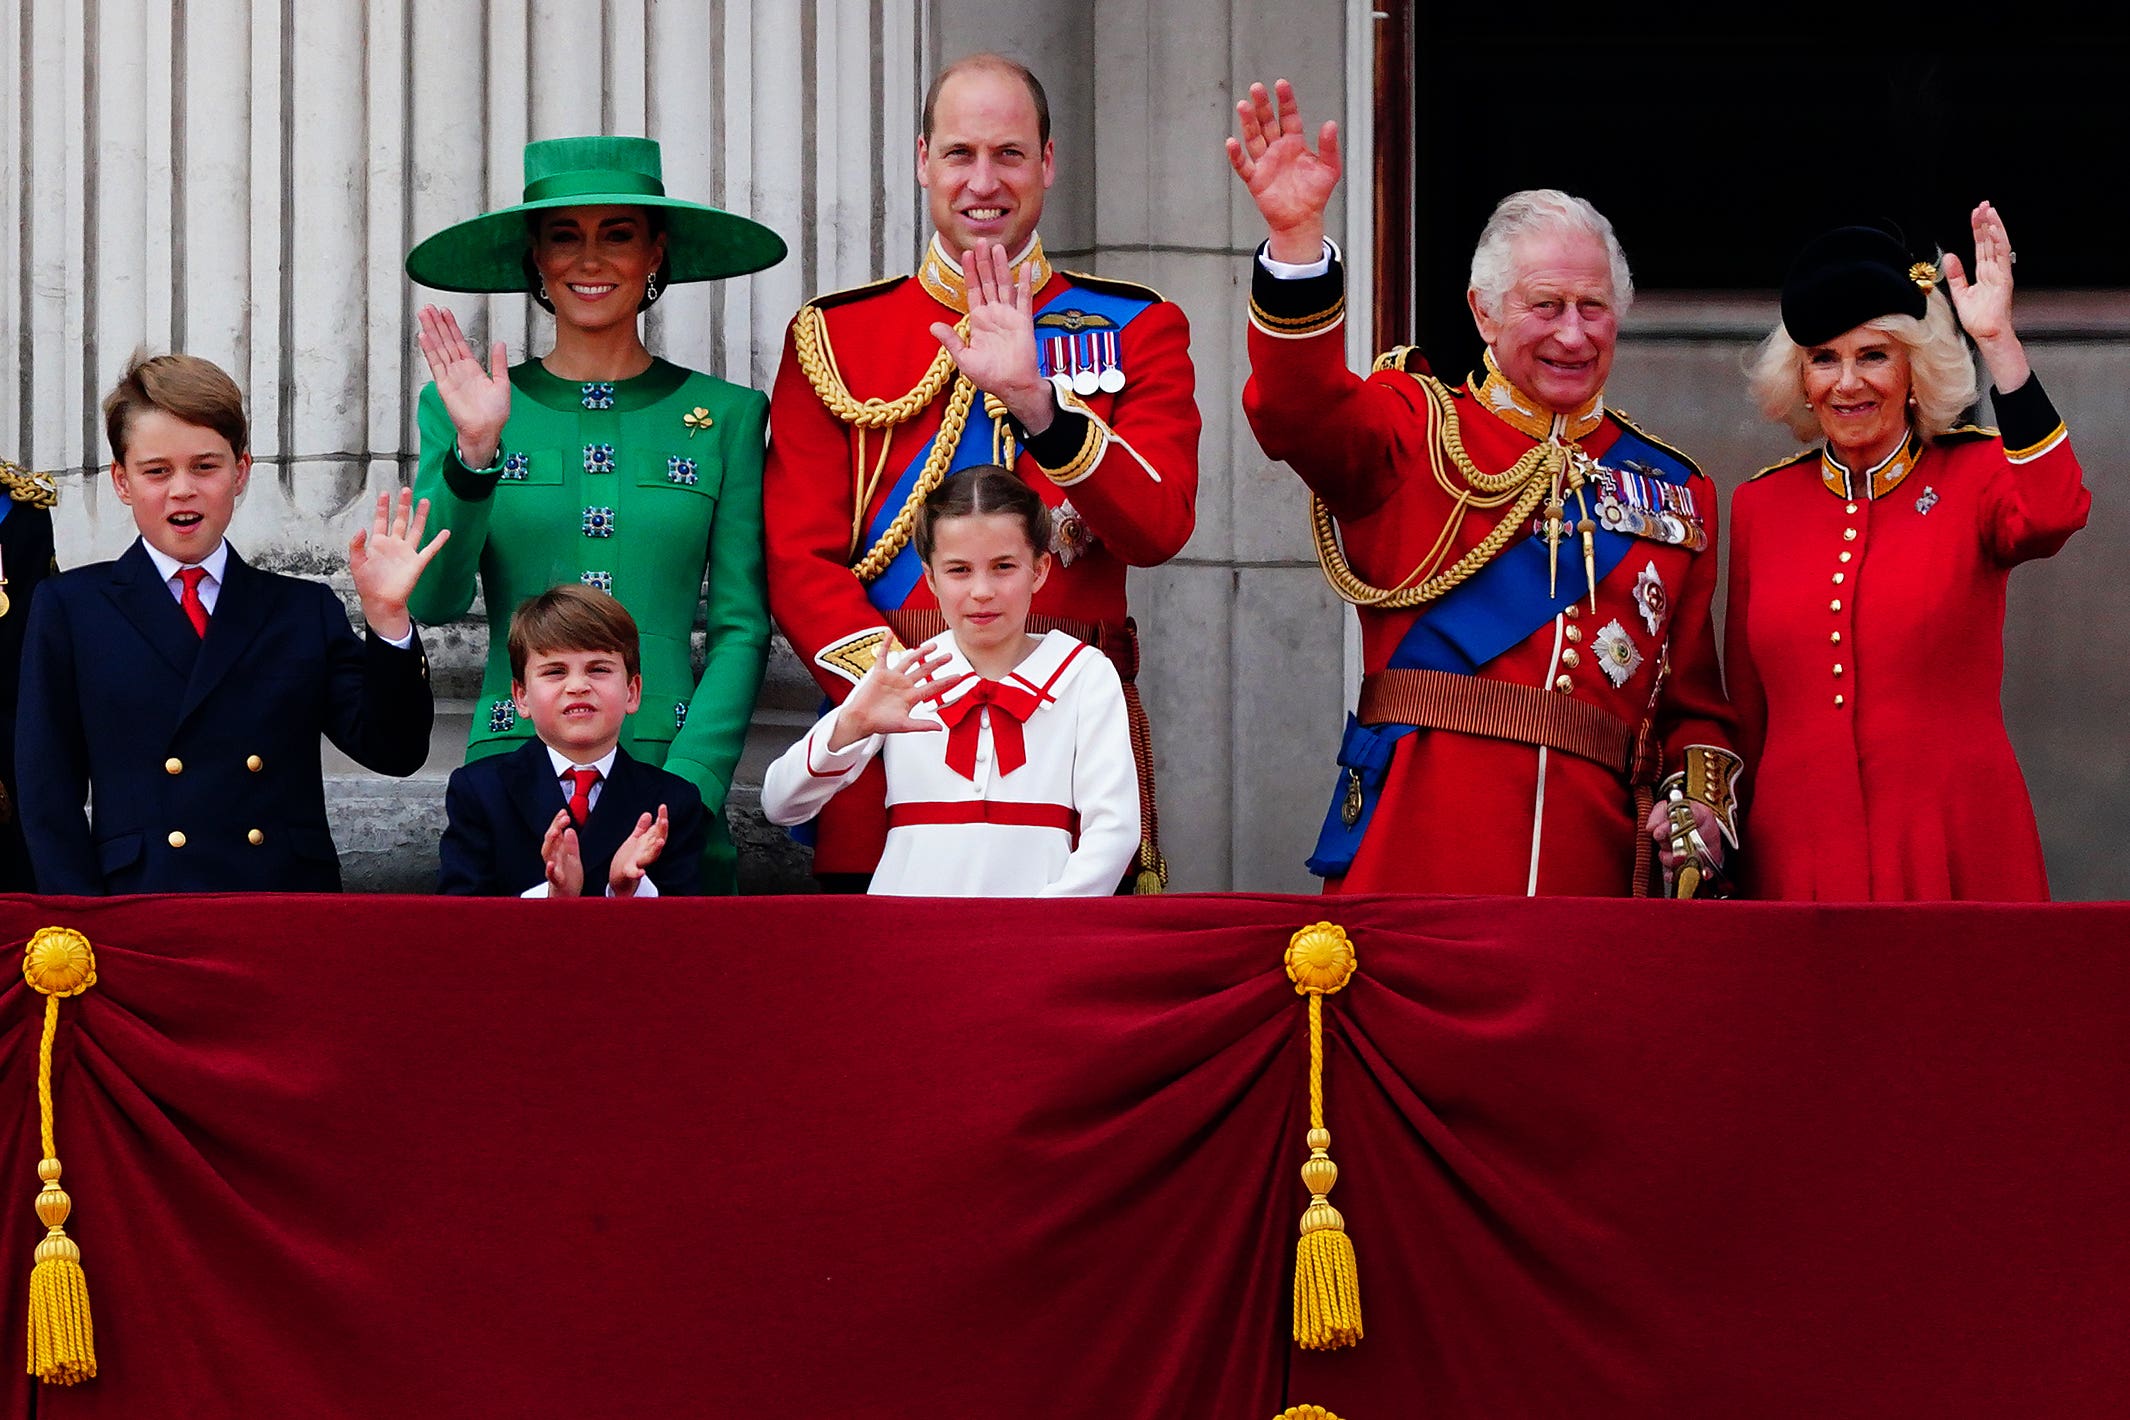 All eyes will be on Buckingham Palace’s balcony this Saturday to see if Kate Middleton will make an appearance at Trooping the Colour